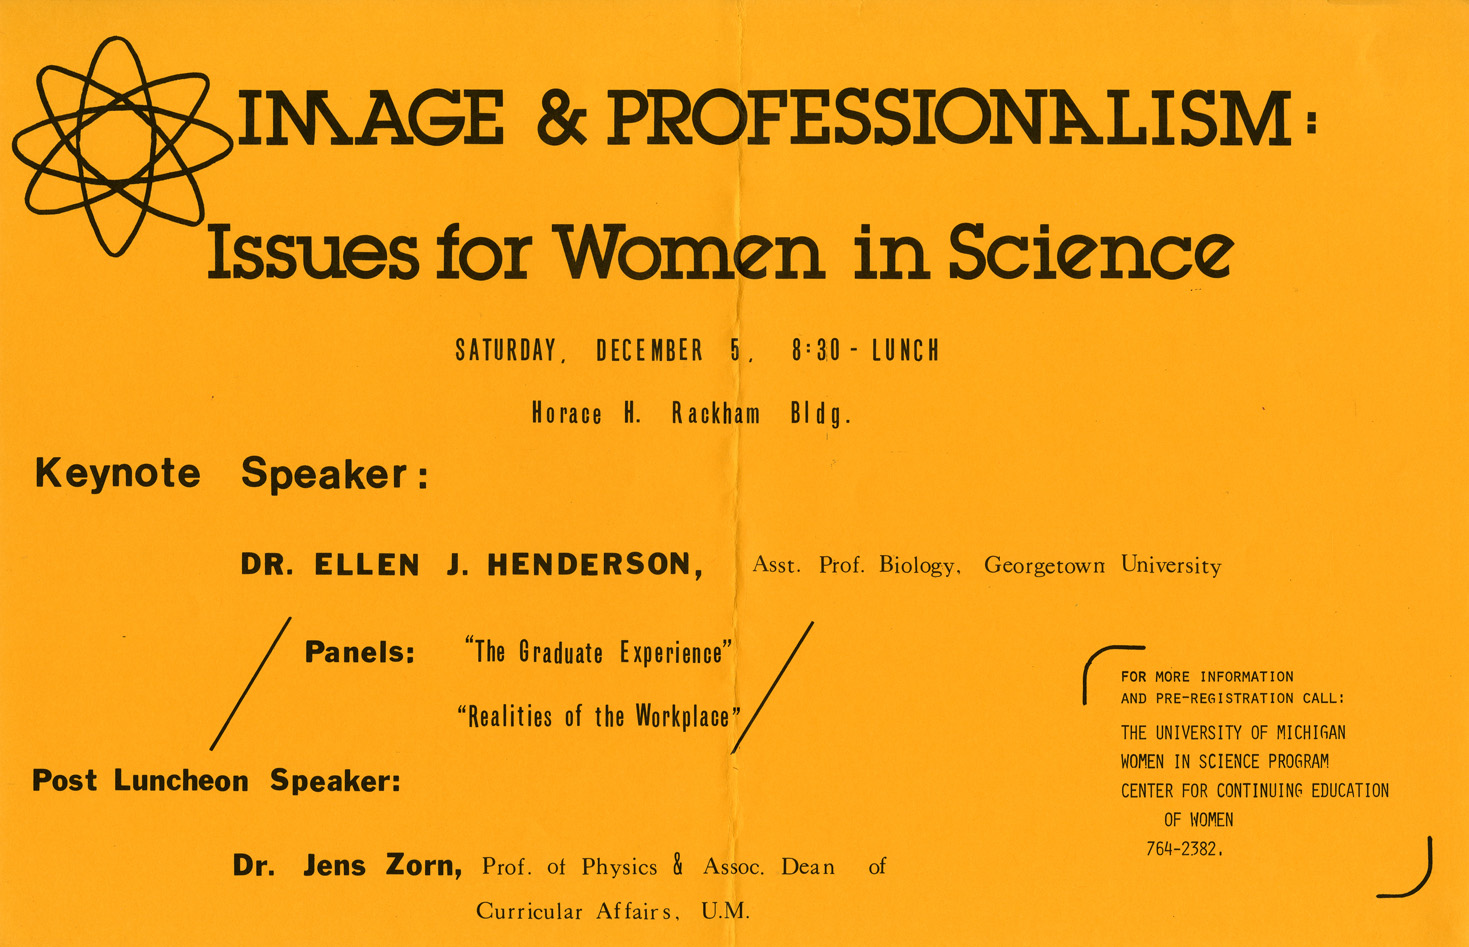 Image and Professionalism Conference poster, 1981